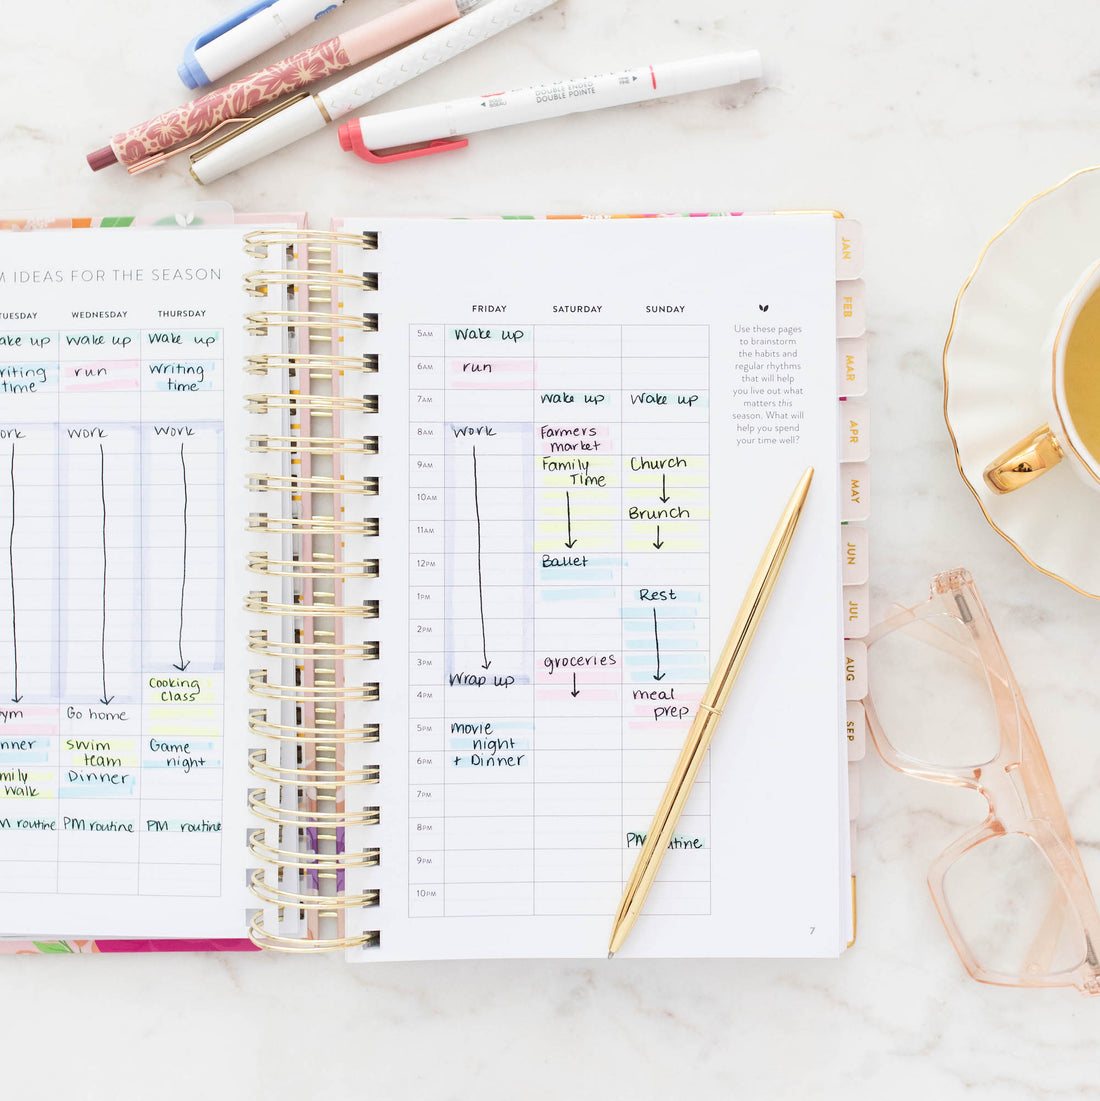 How to Make the Most of Your Season by Season Planner